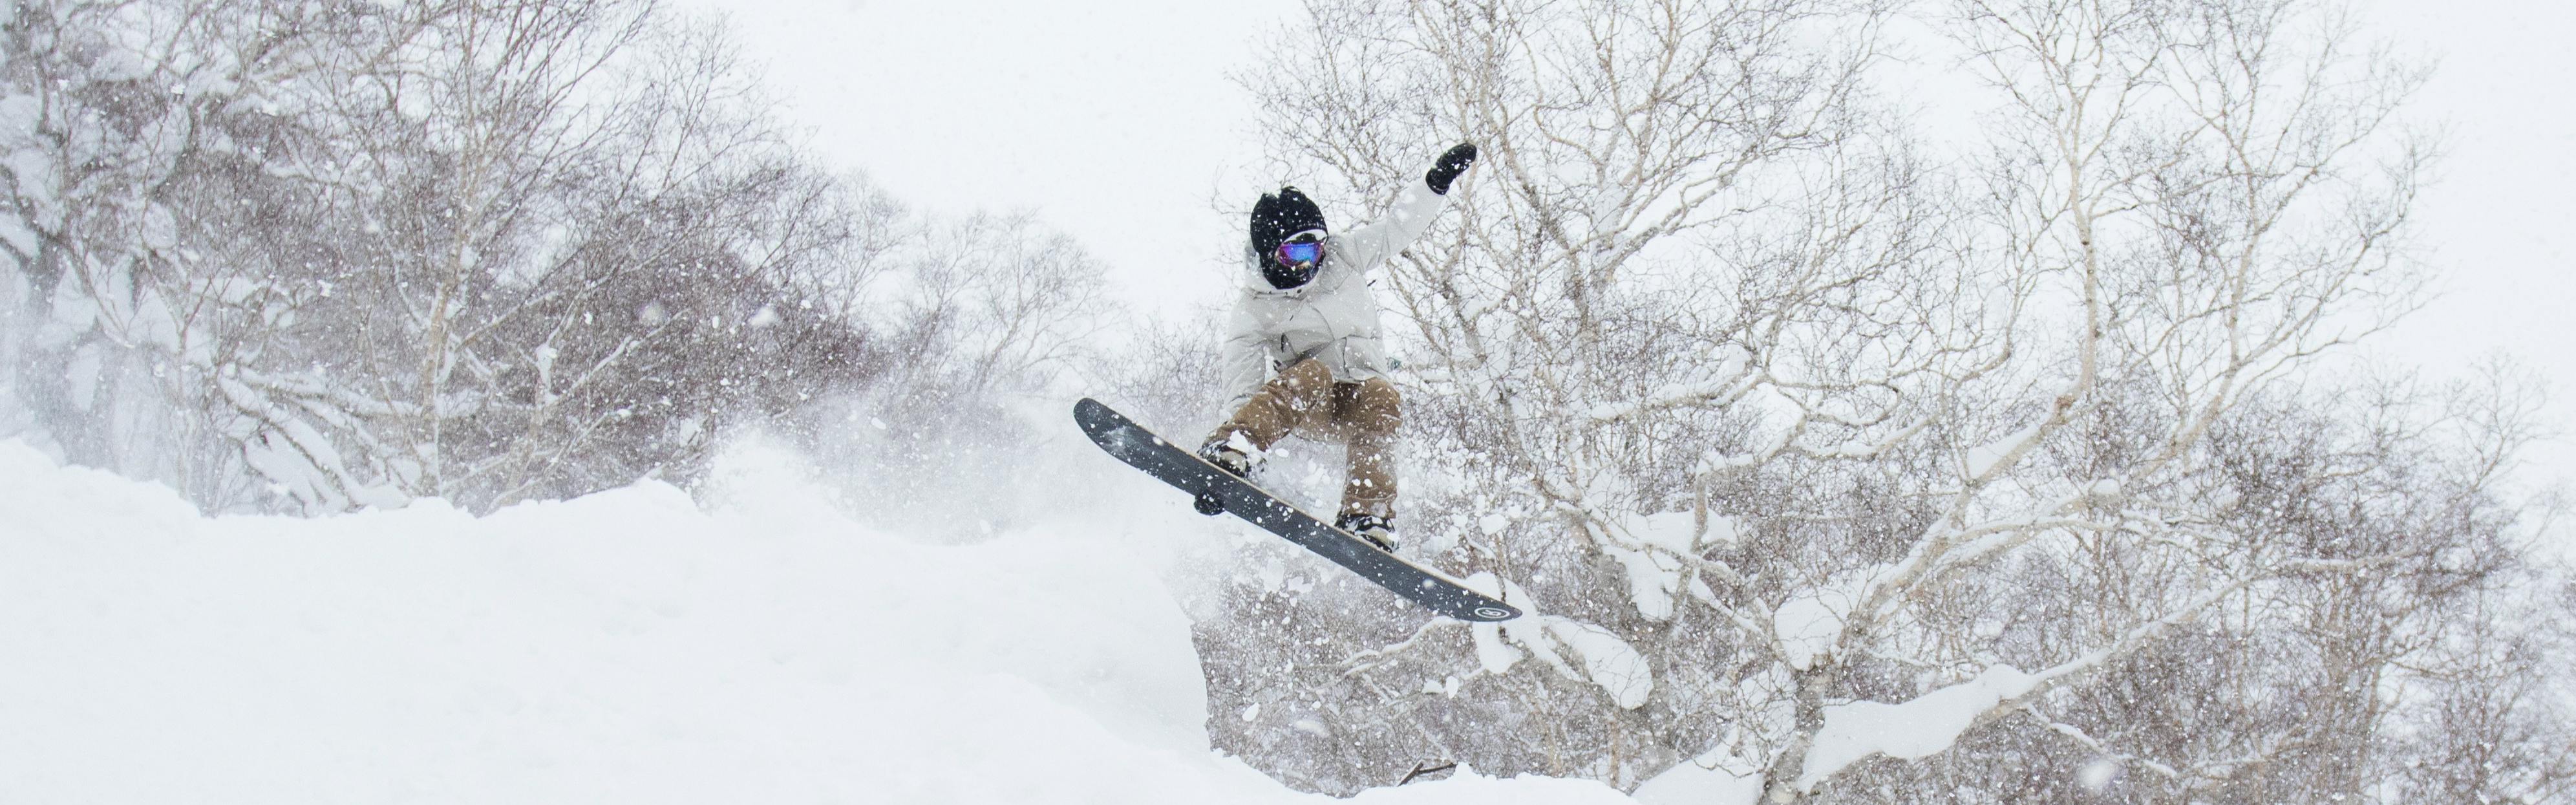 Edging And Waxing Your Snowboard And Skis - An Amateur's Guide — The Snow  Chasers